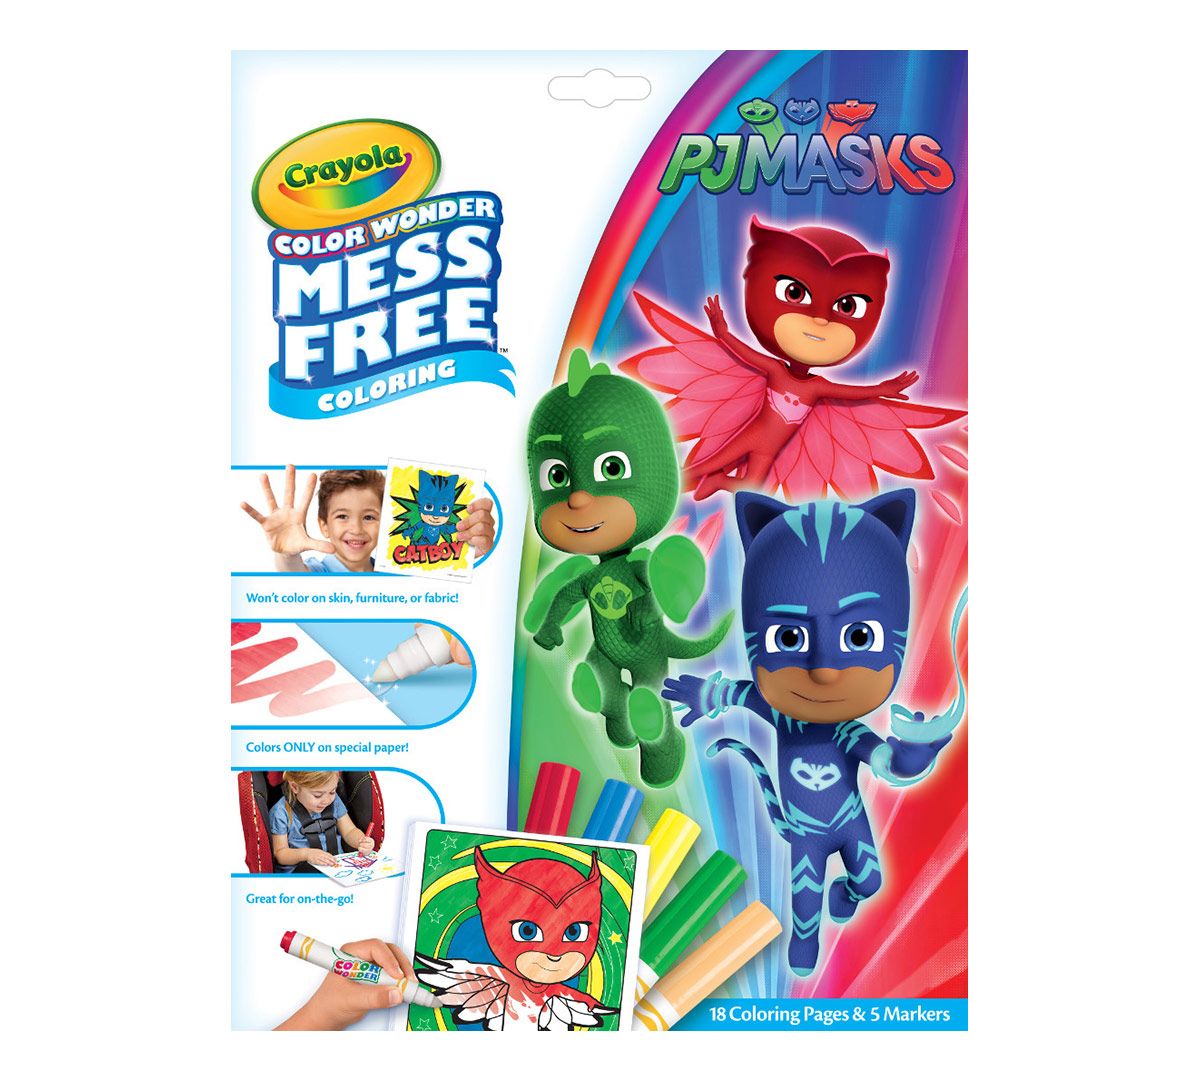 Disney Junior Pj Masks Coloring Pages - Download Pj Masks Colouring In Sheets And Make Your Own Masks Fun Kids The Uk S Children S Radio Station